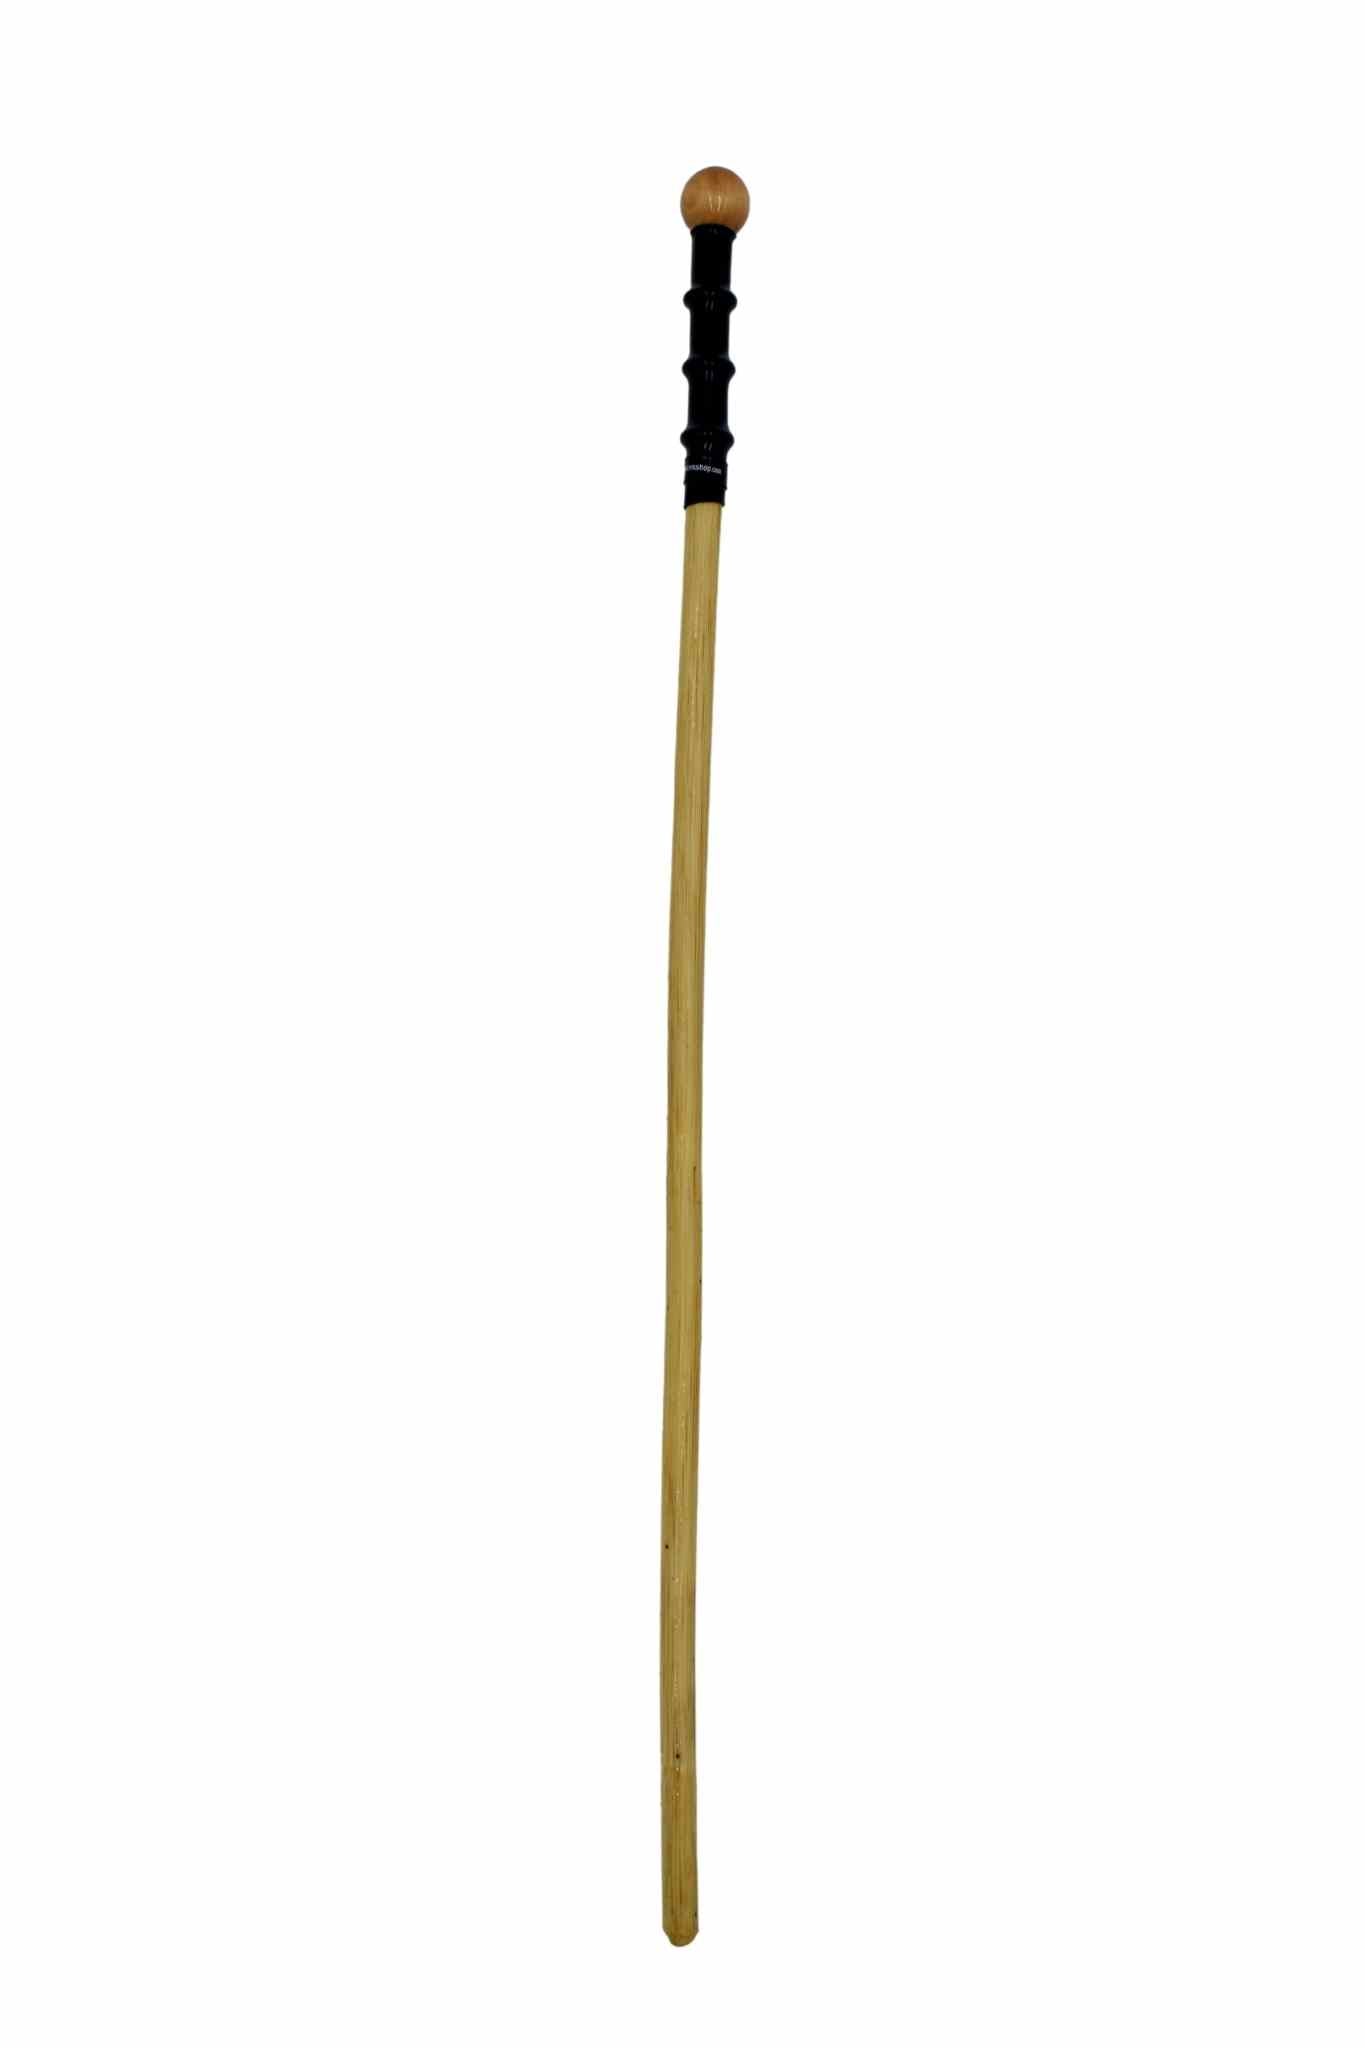 The Beaded Finished Rattan Cane.